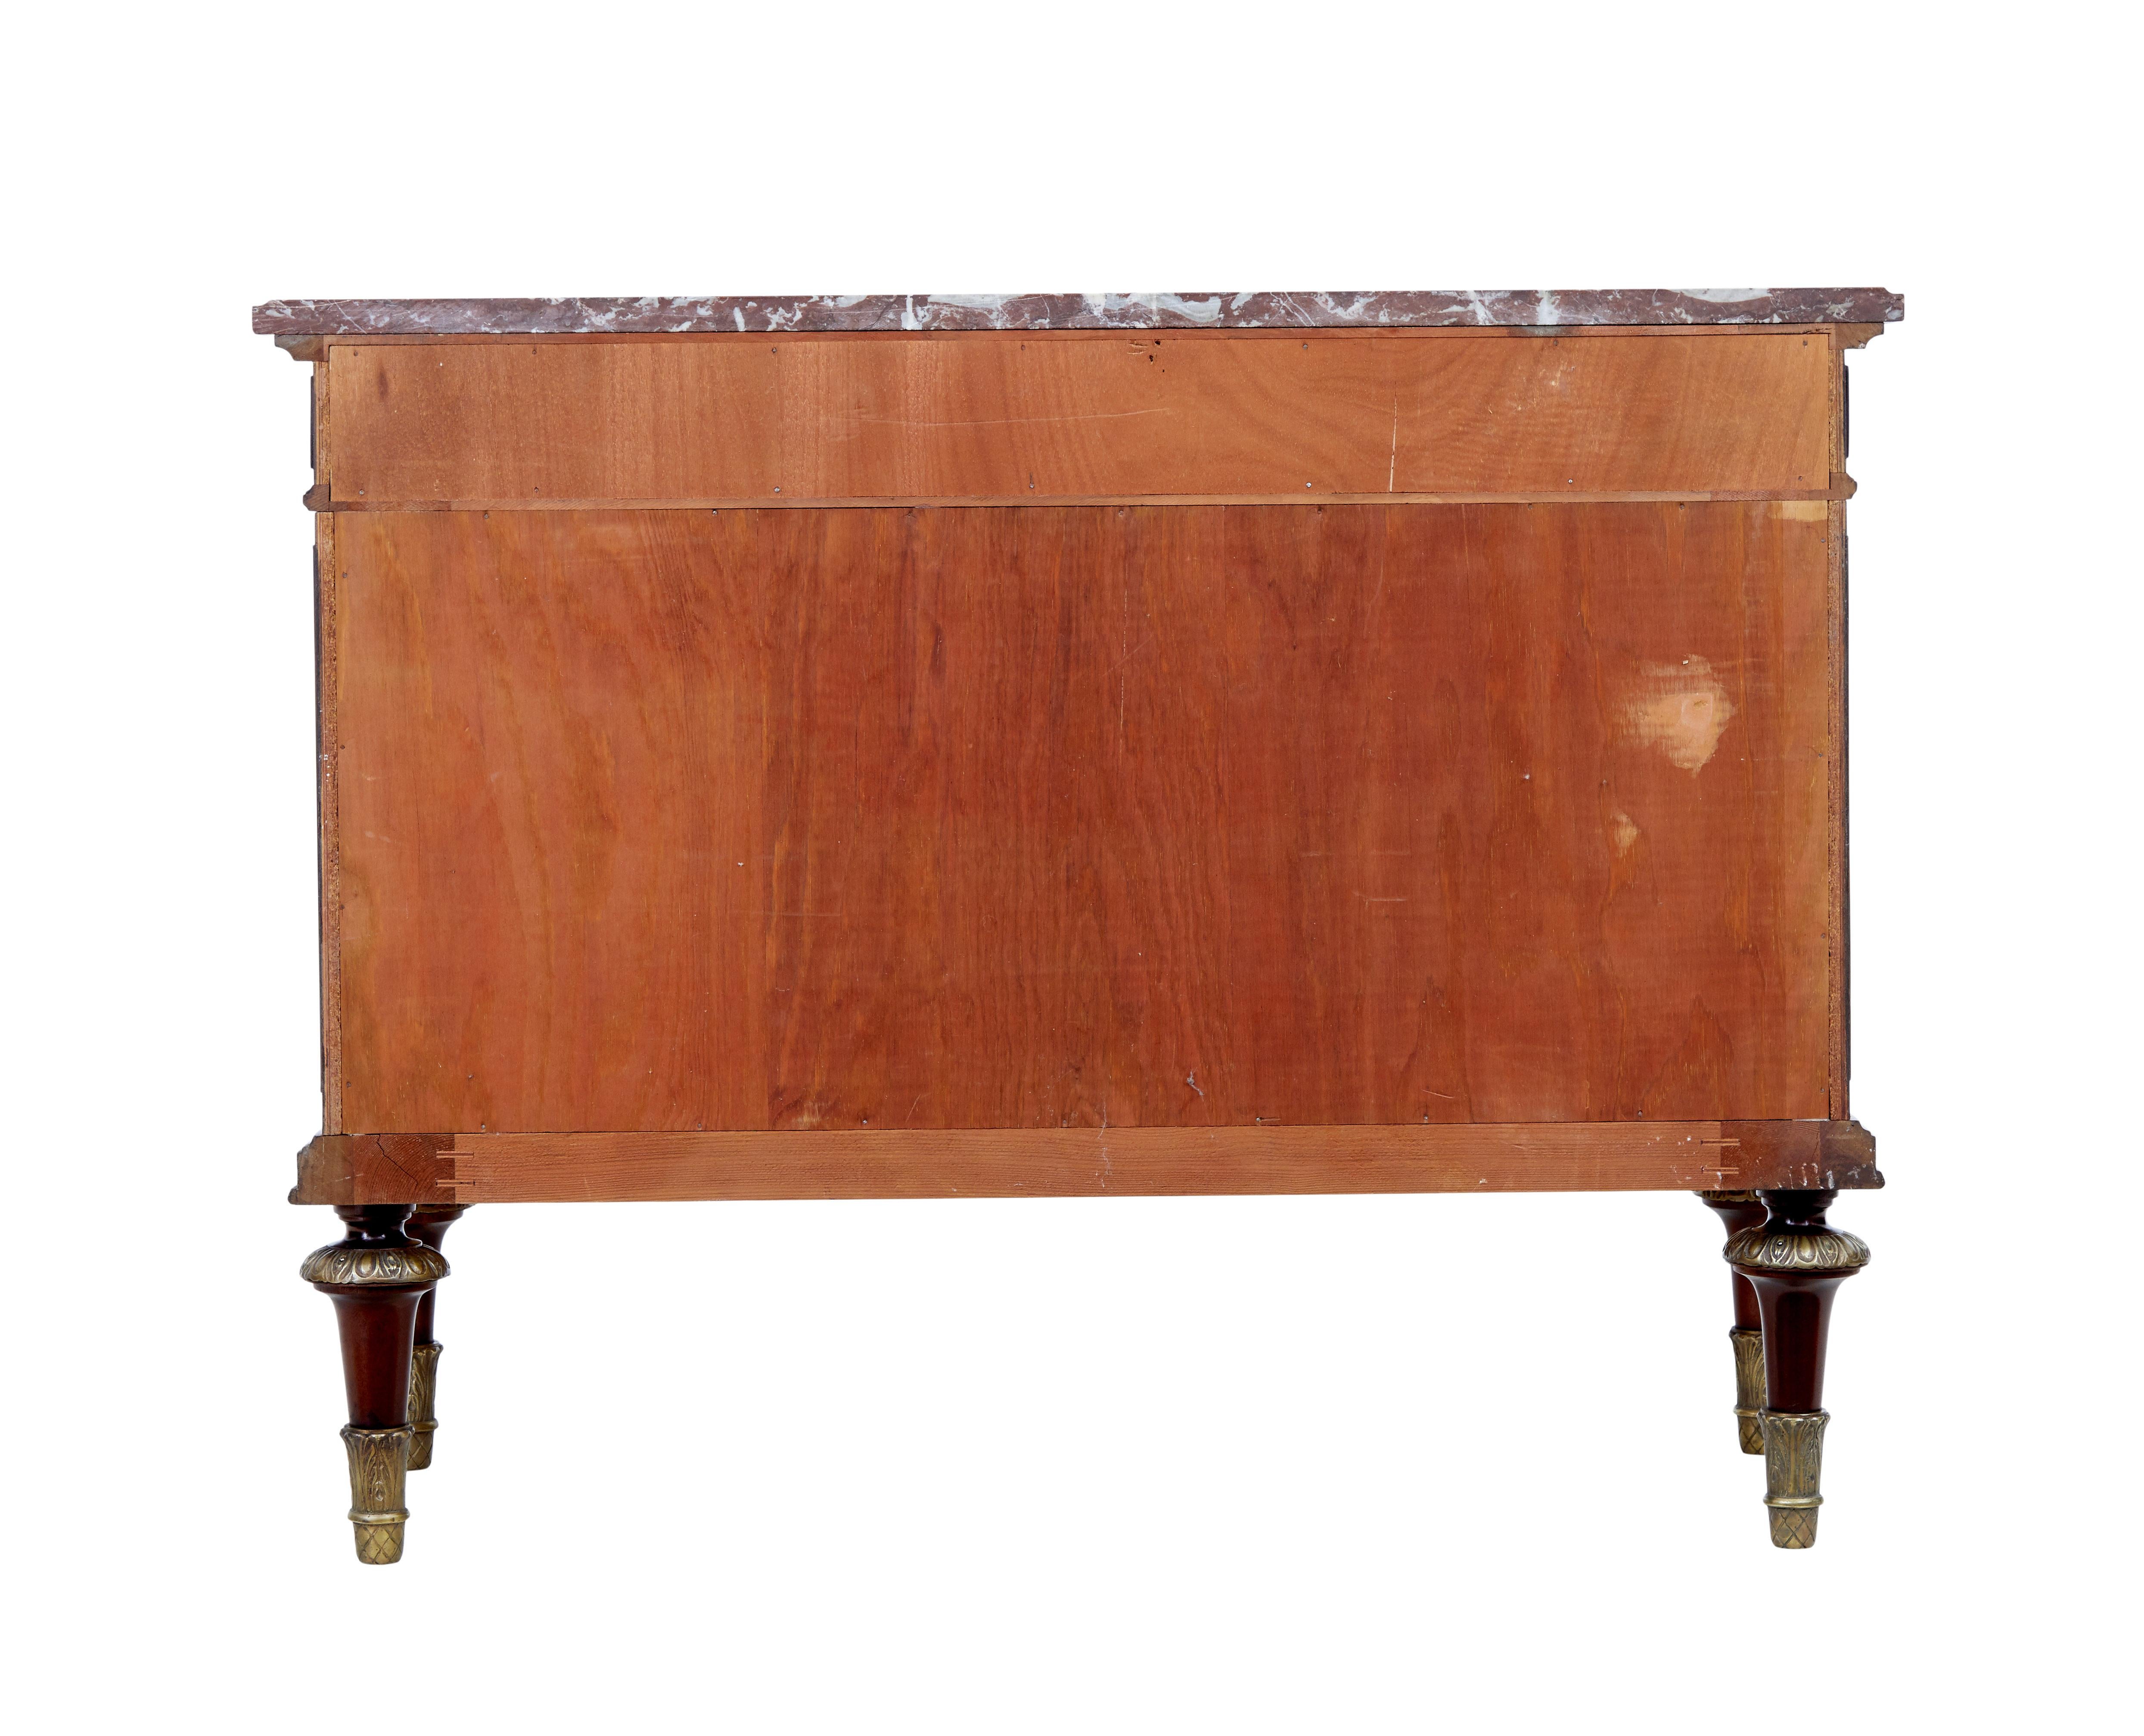 20th Century Midcentury Ornate Mahogany Marble Top Chest of Drawers For Sale